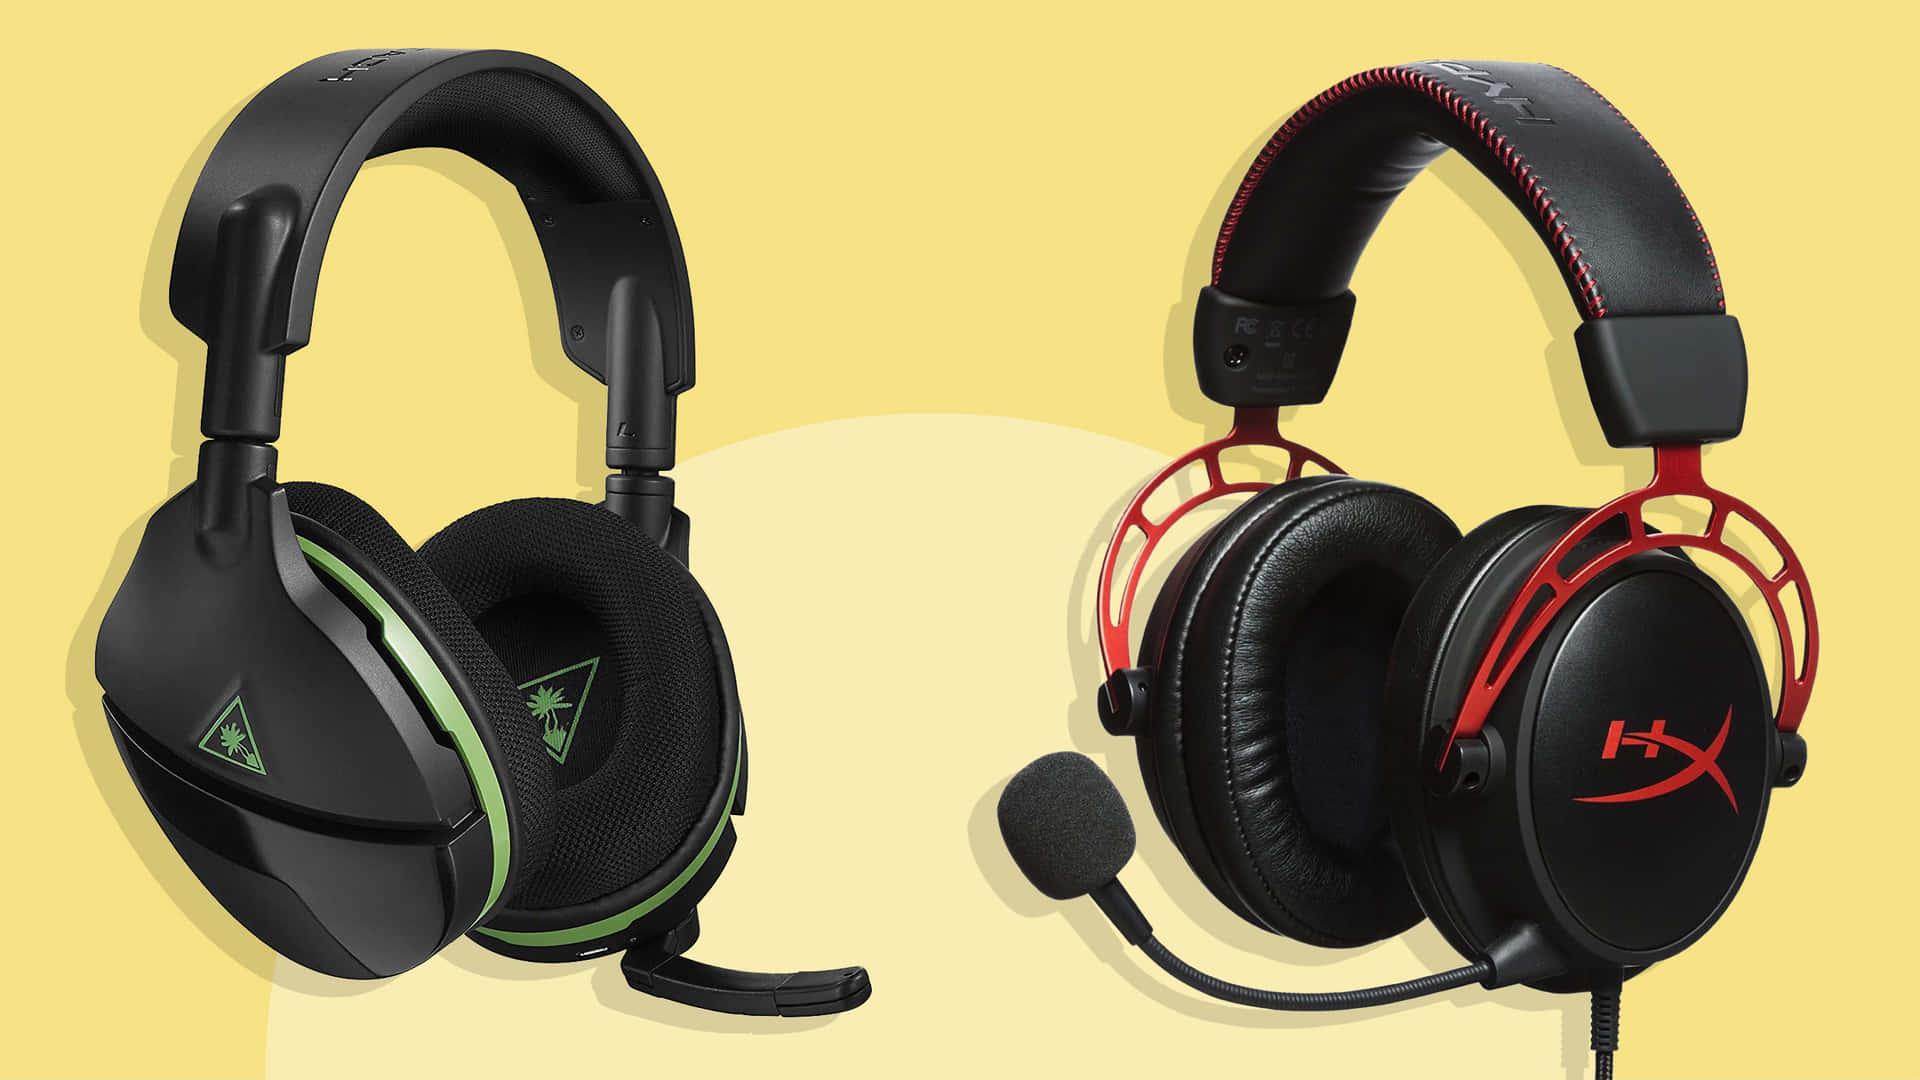 Get an immersive and realistic gaming experience with gaming headsets Wallpaper